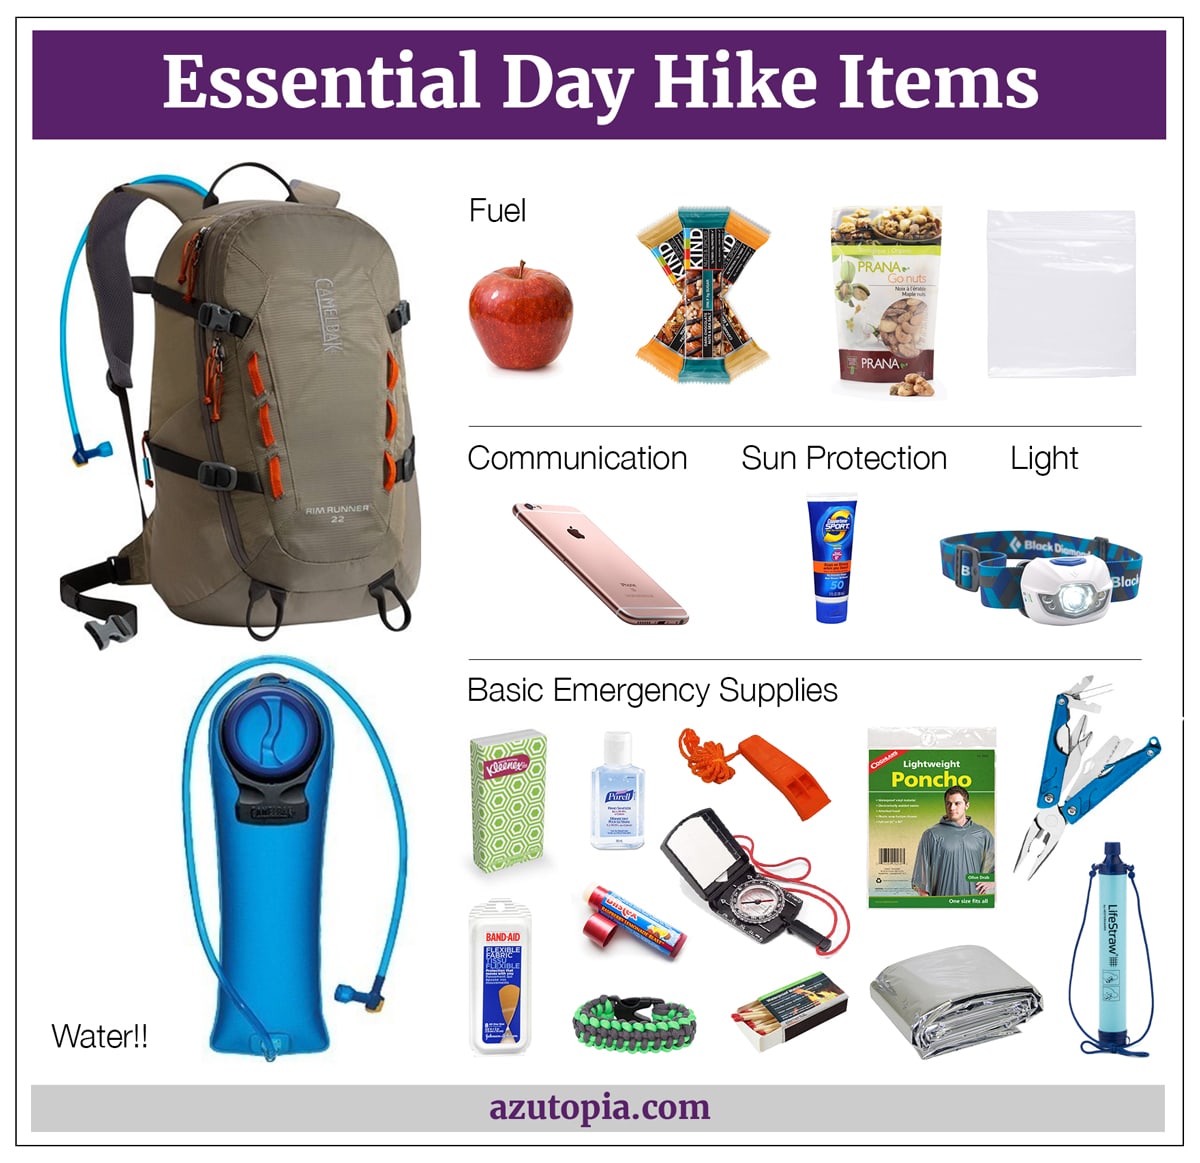 Rucksack, snacks, sunscreen, layers, compass, map, GPS, food, water, hat, gloves